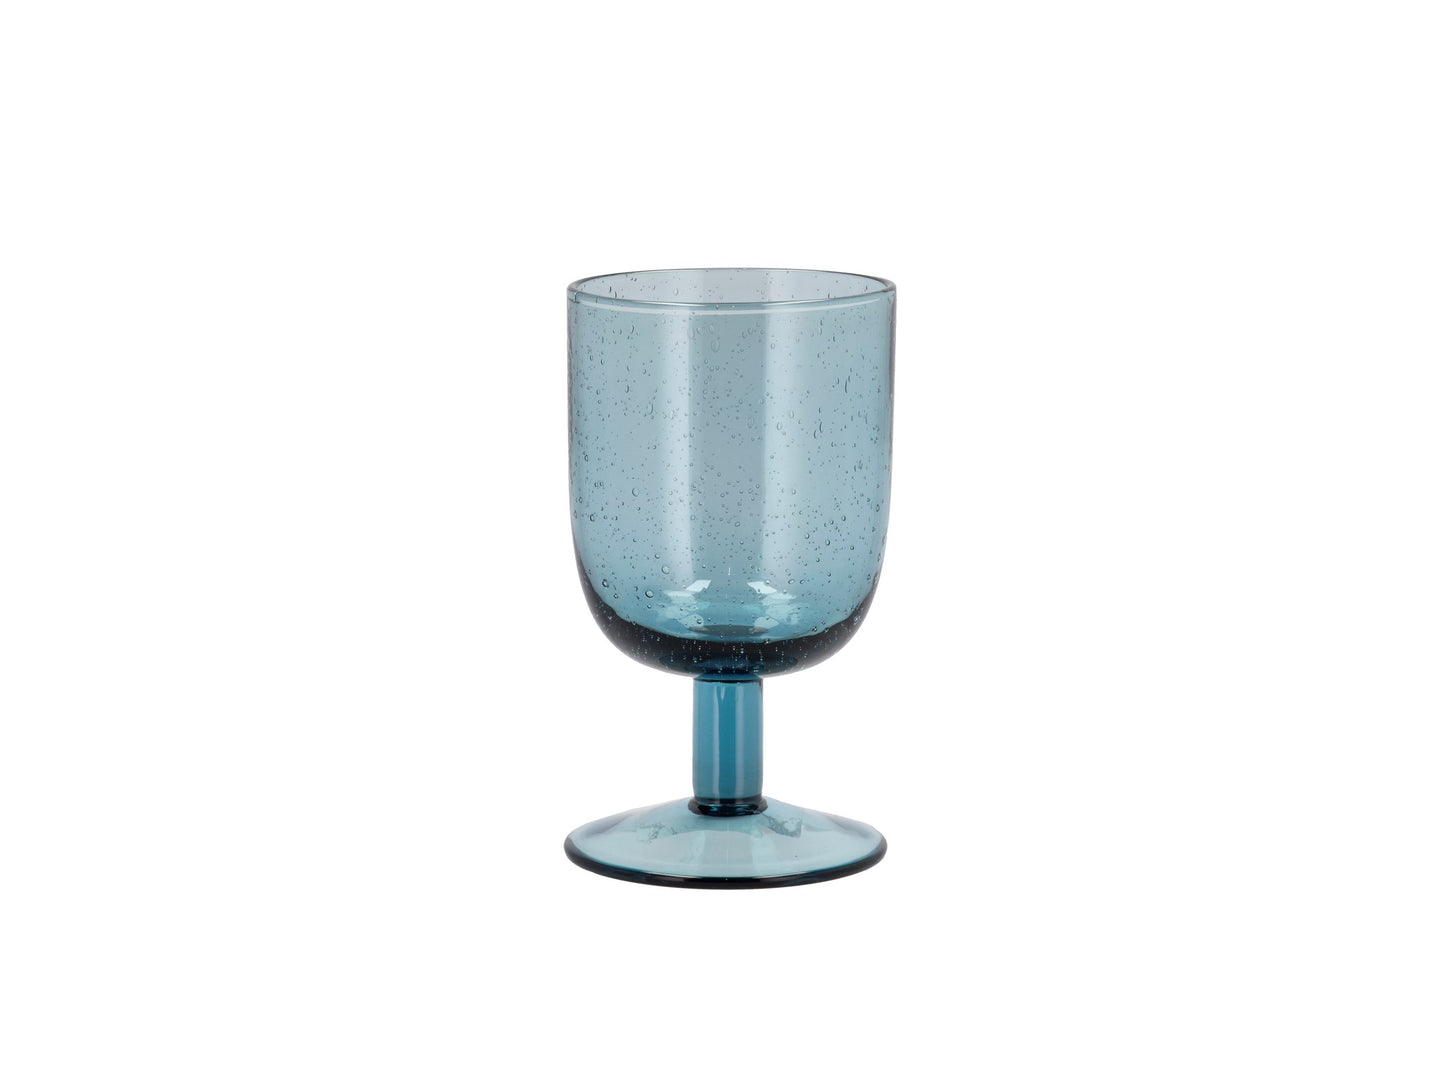 Valencia Footed Drinking Glasses - Set of 2